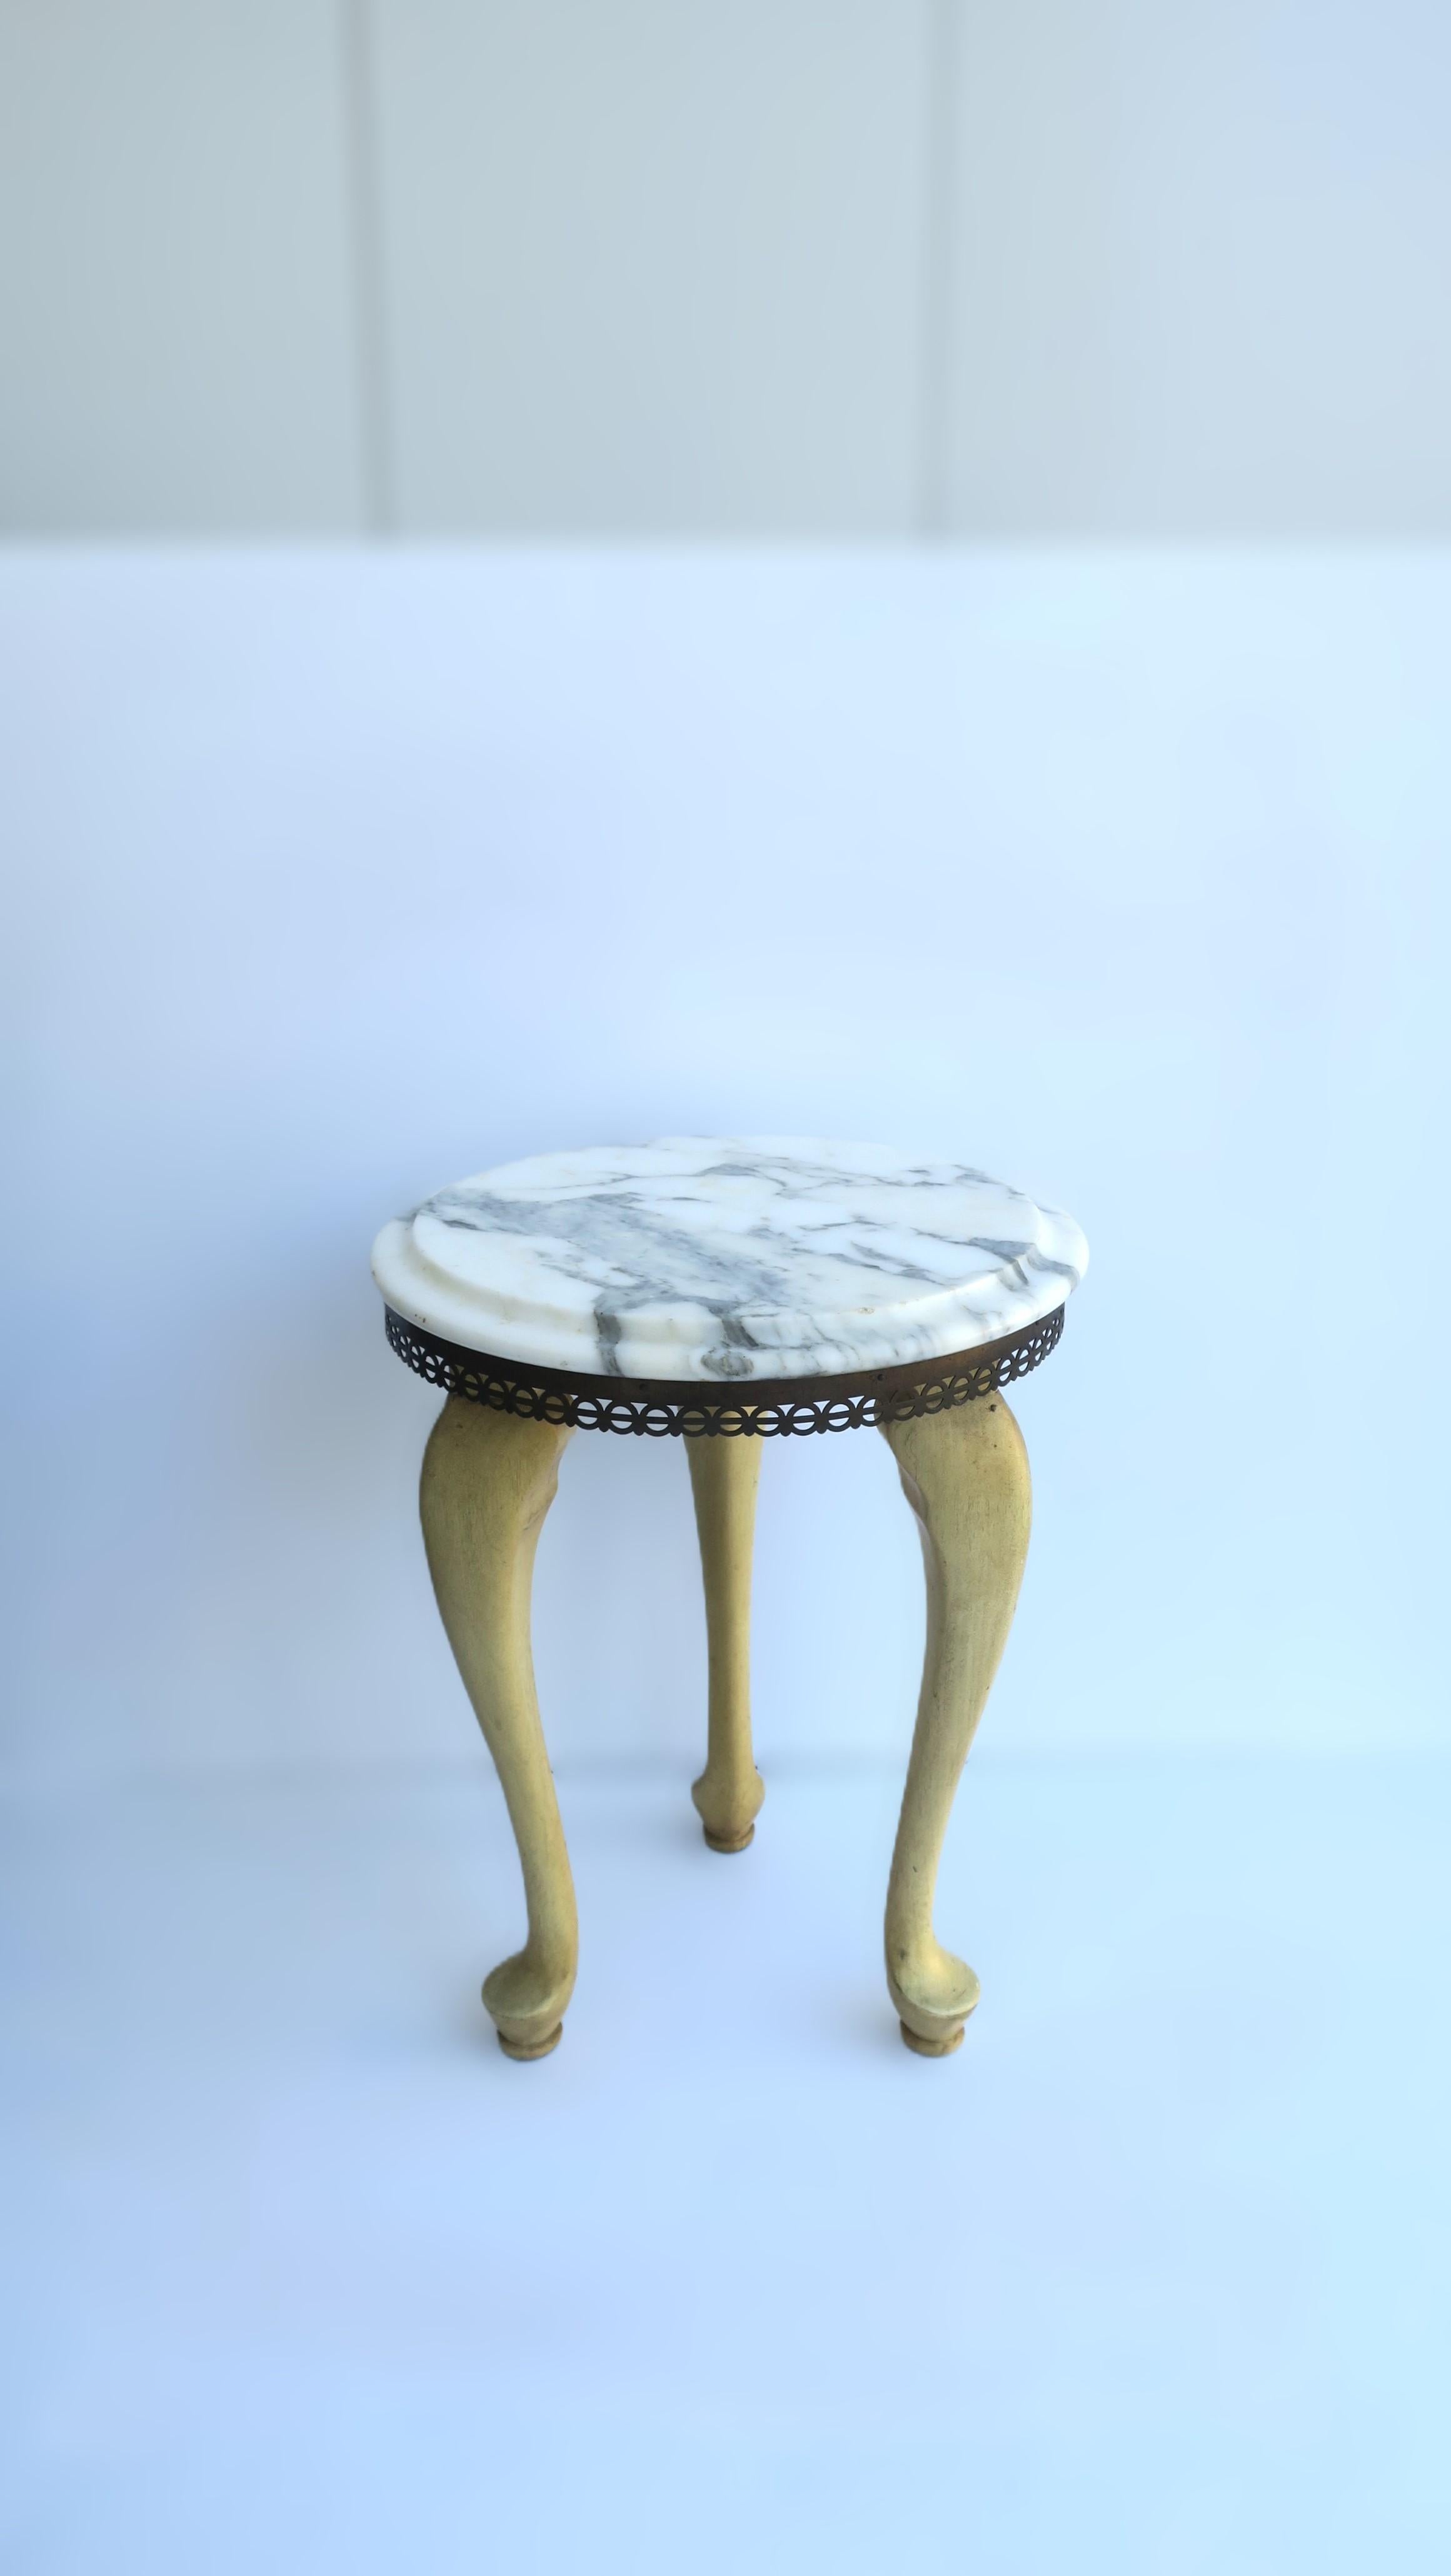 **One of two available, each sold separately, as per listing.

An Italian marble and wood side or drinks table, in the Rococo style, circa early to mid-20th century, Italy. Table has a blonde wood base with a cabriole leg and pad feet, finished with